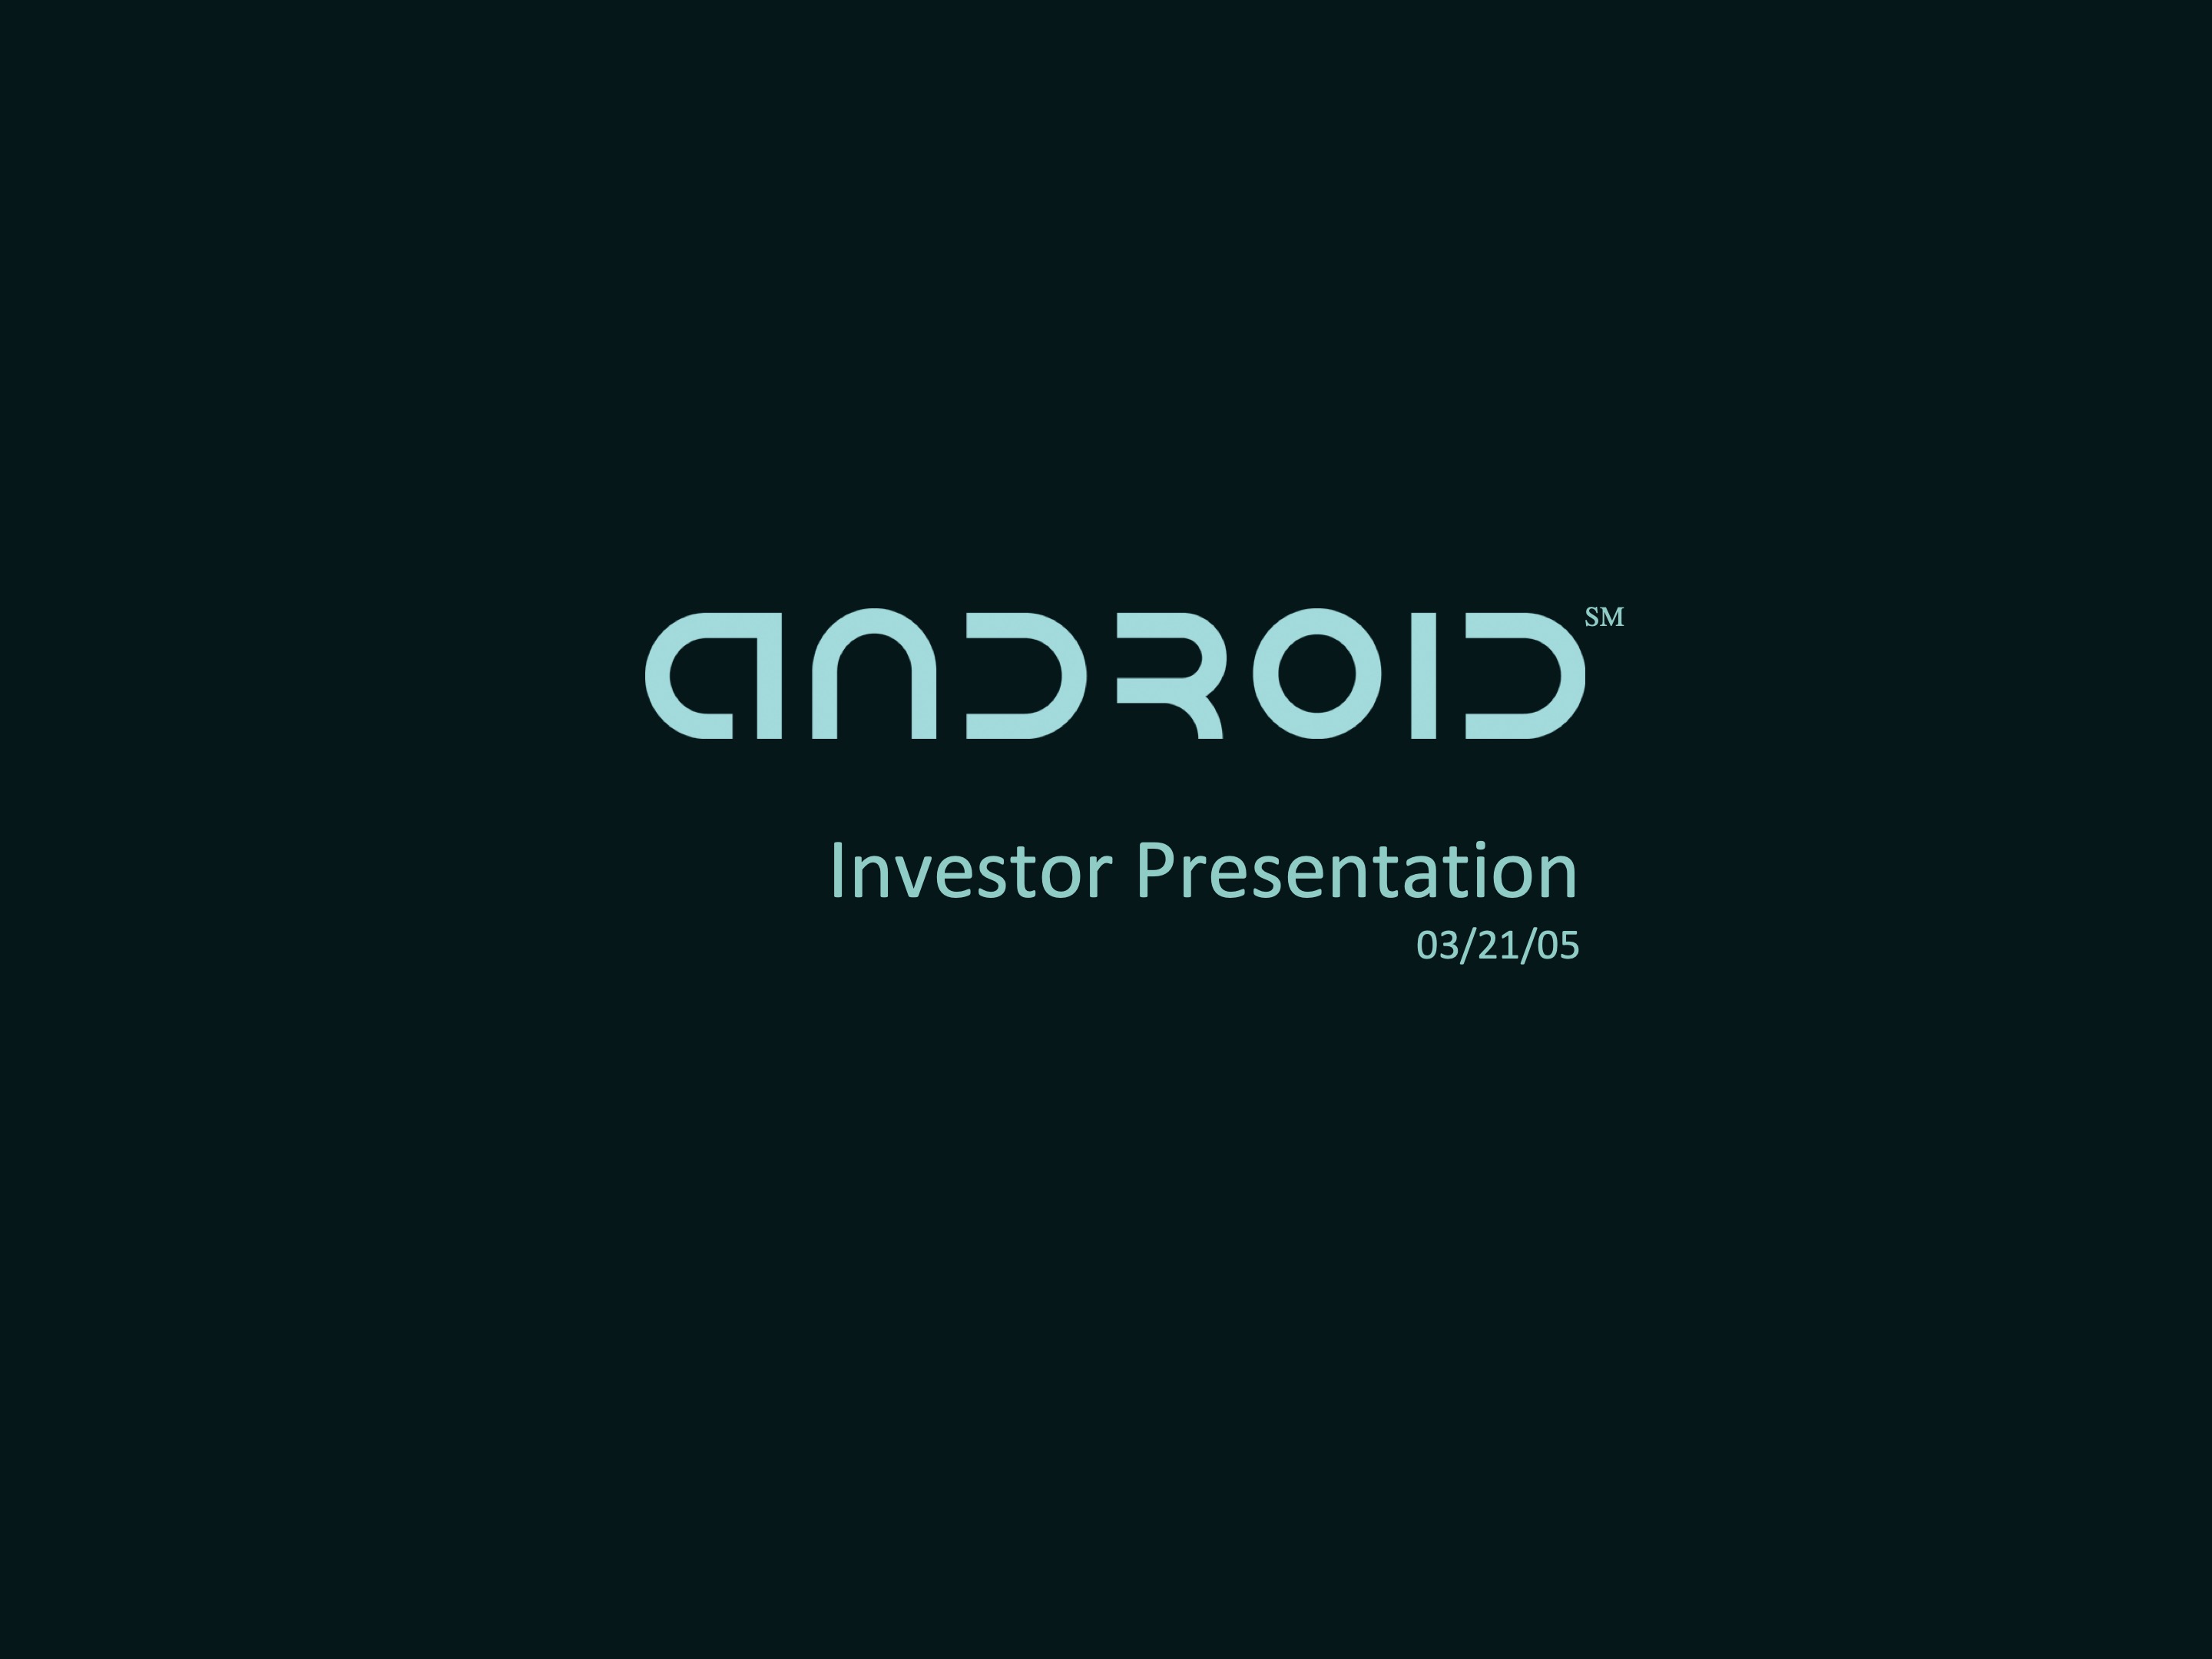 Google acquired Android - Android - Historydraft